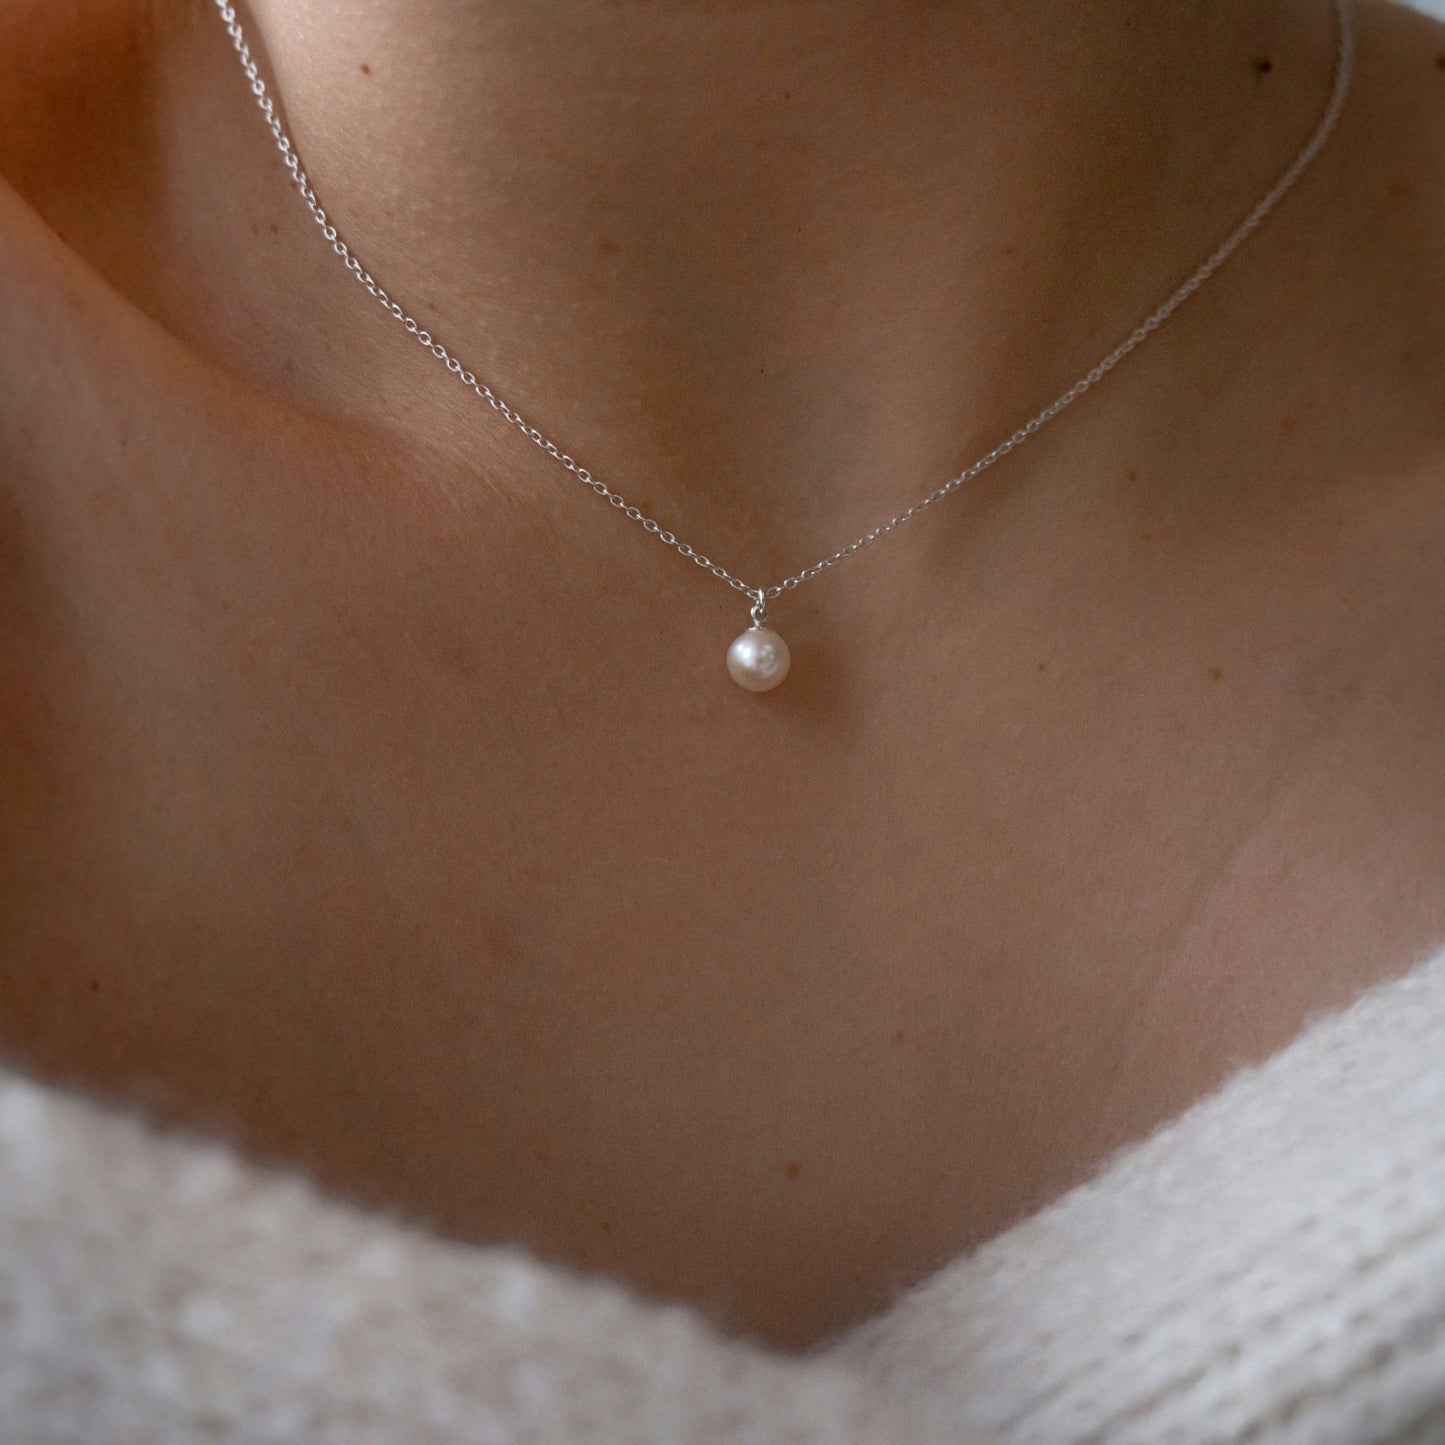 Solitaire pearl necklace